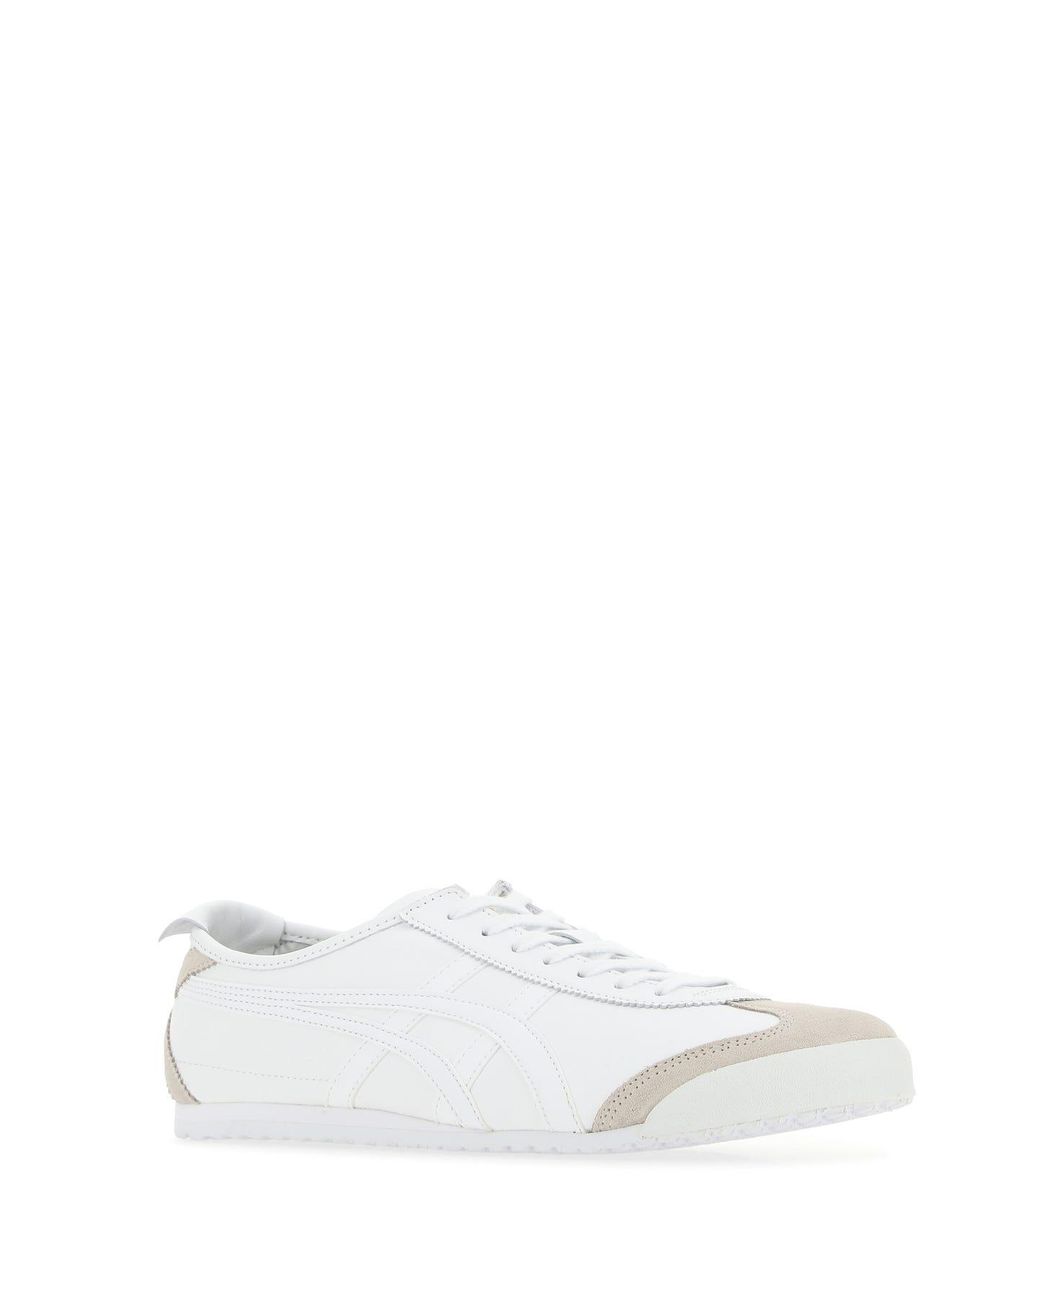 Onitsuka Tiger Mexico 66 Shoes in White | Lyst